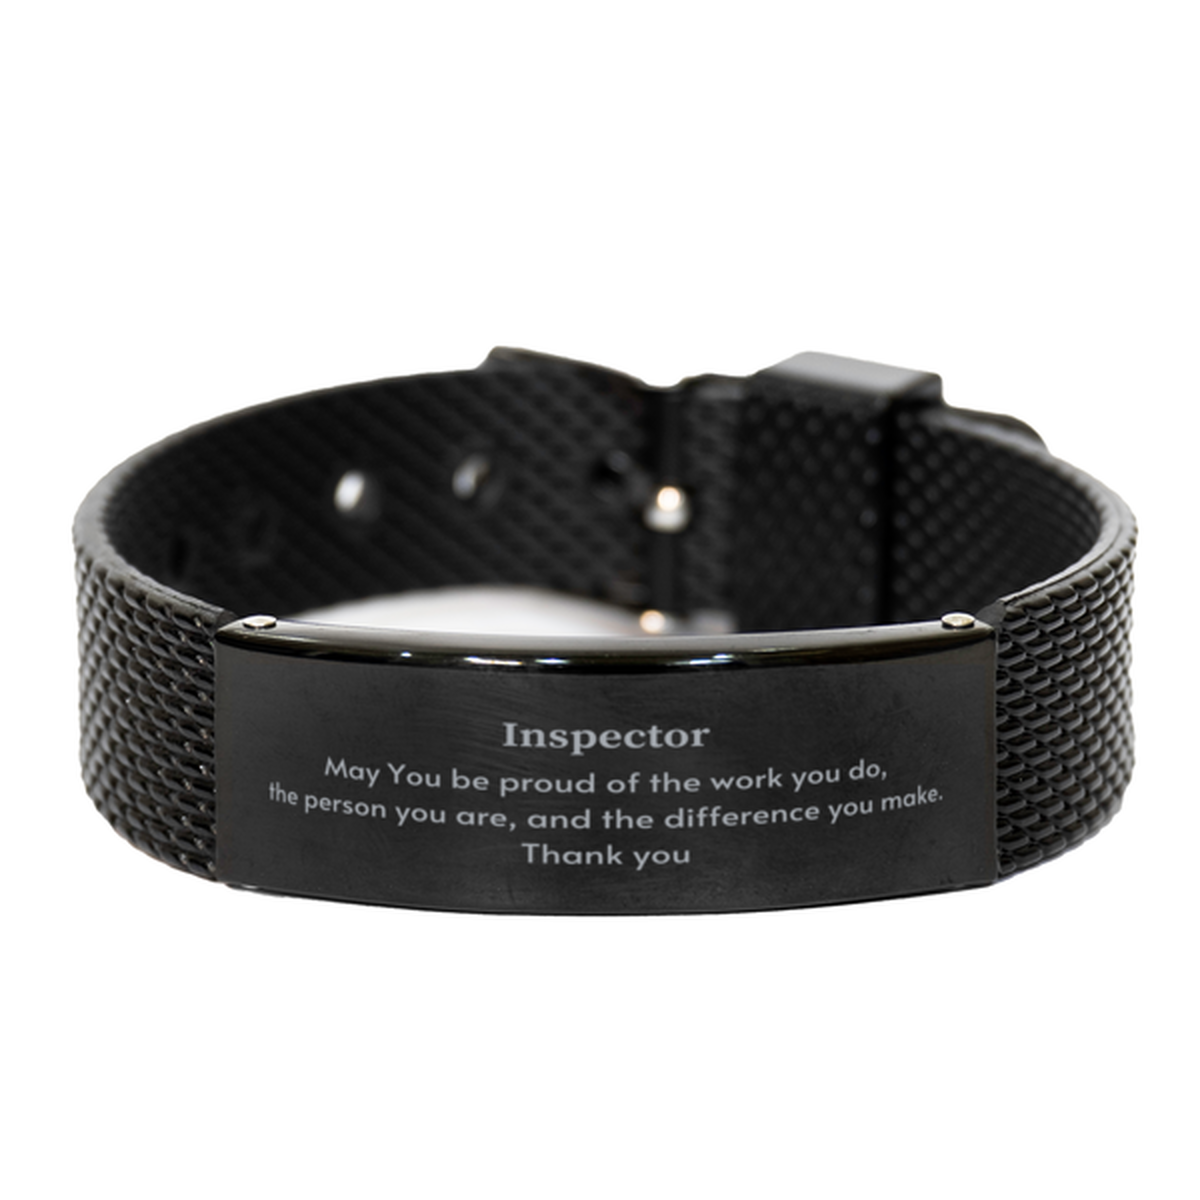 Heartwarming Black Shark Mesh Bracelet Retirement Coworkers Gifts for Inspector, Inspector May You be proud of the work you do, the person you are Gifts for Boss Men Women Friends